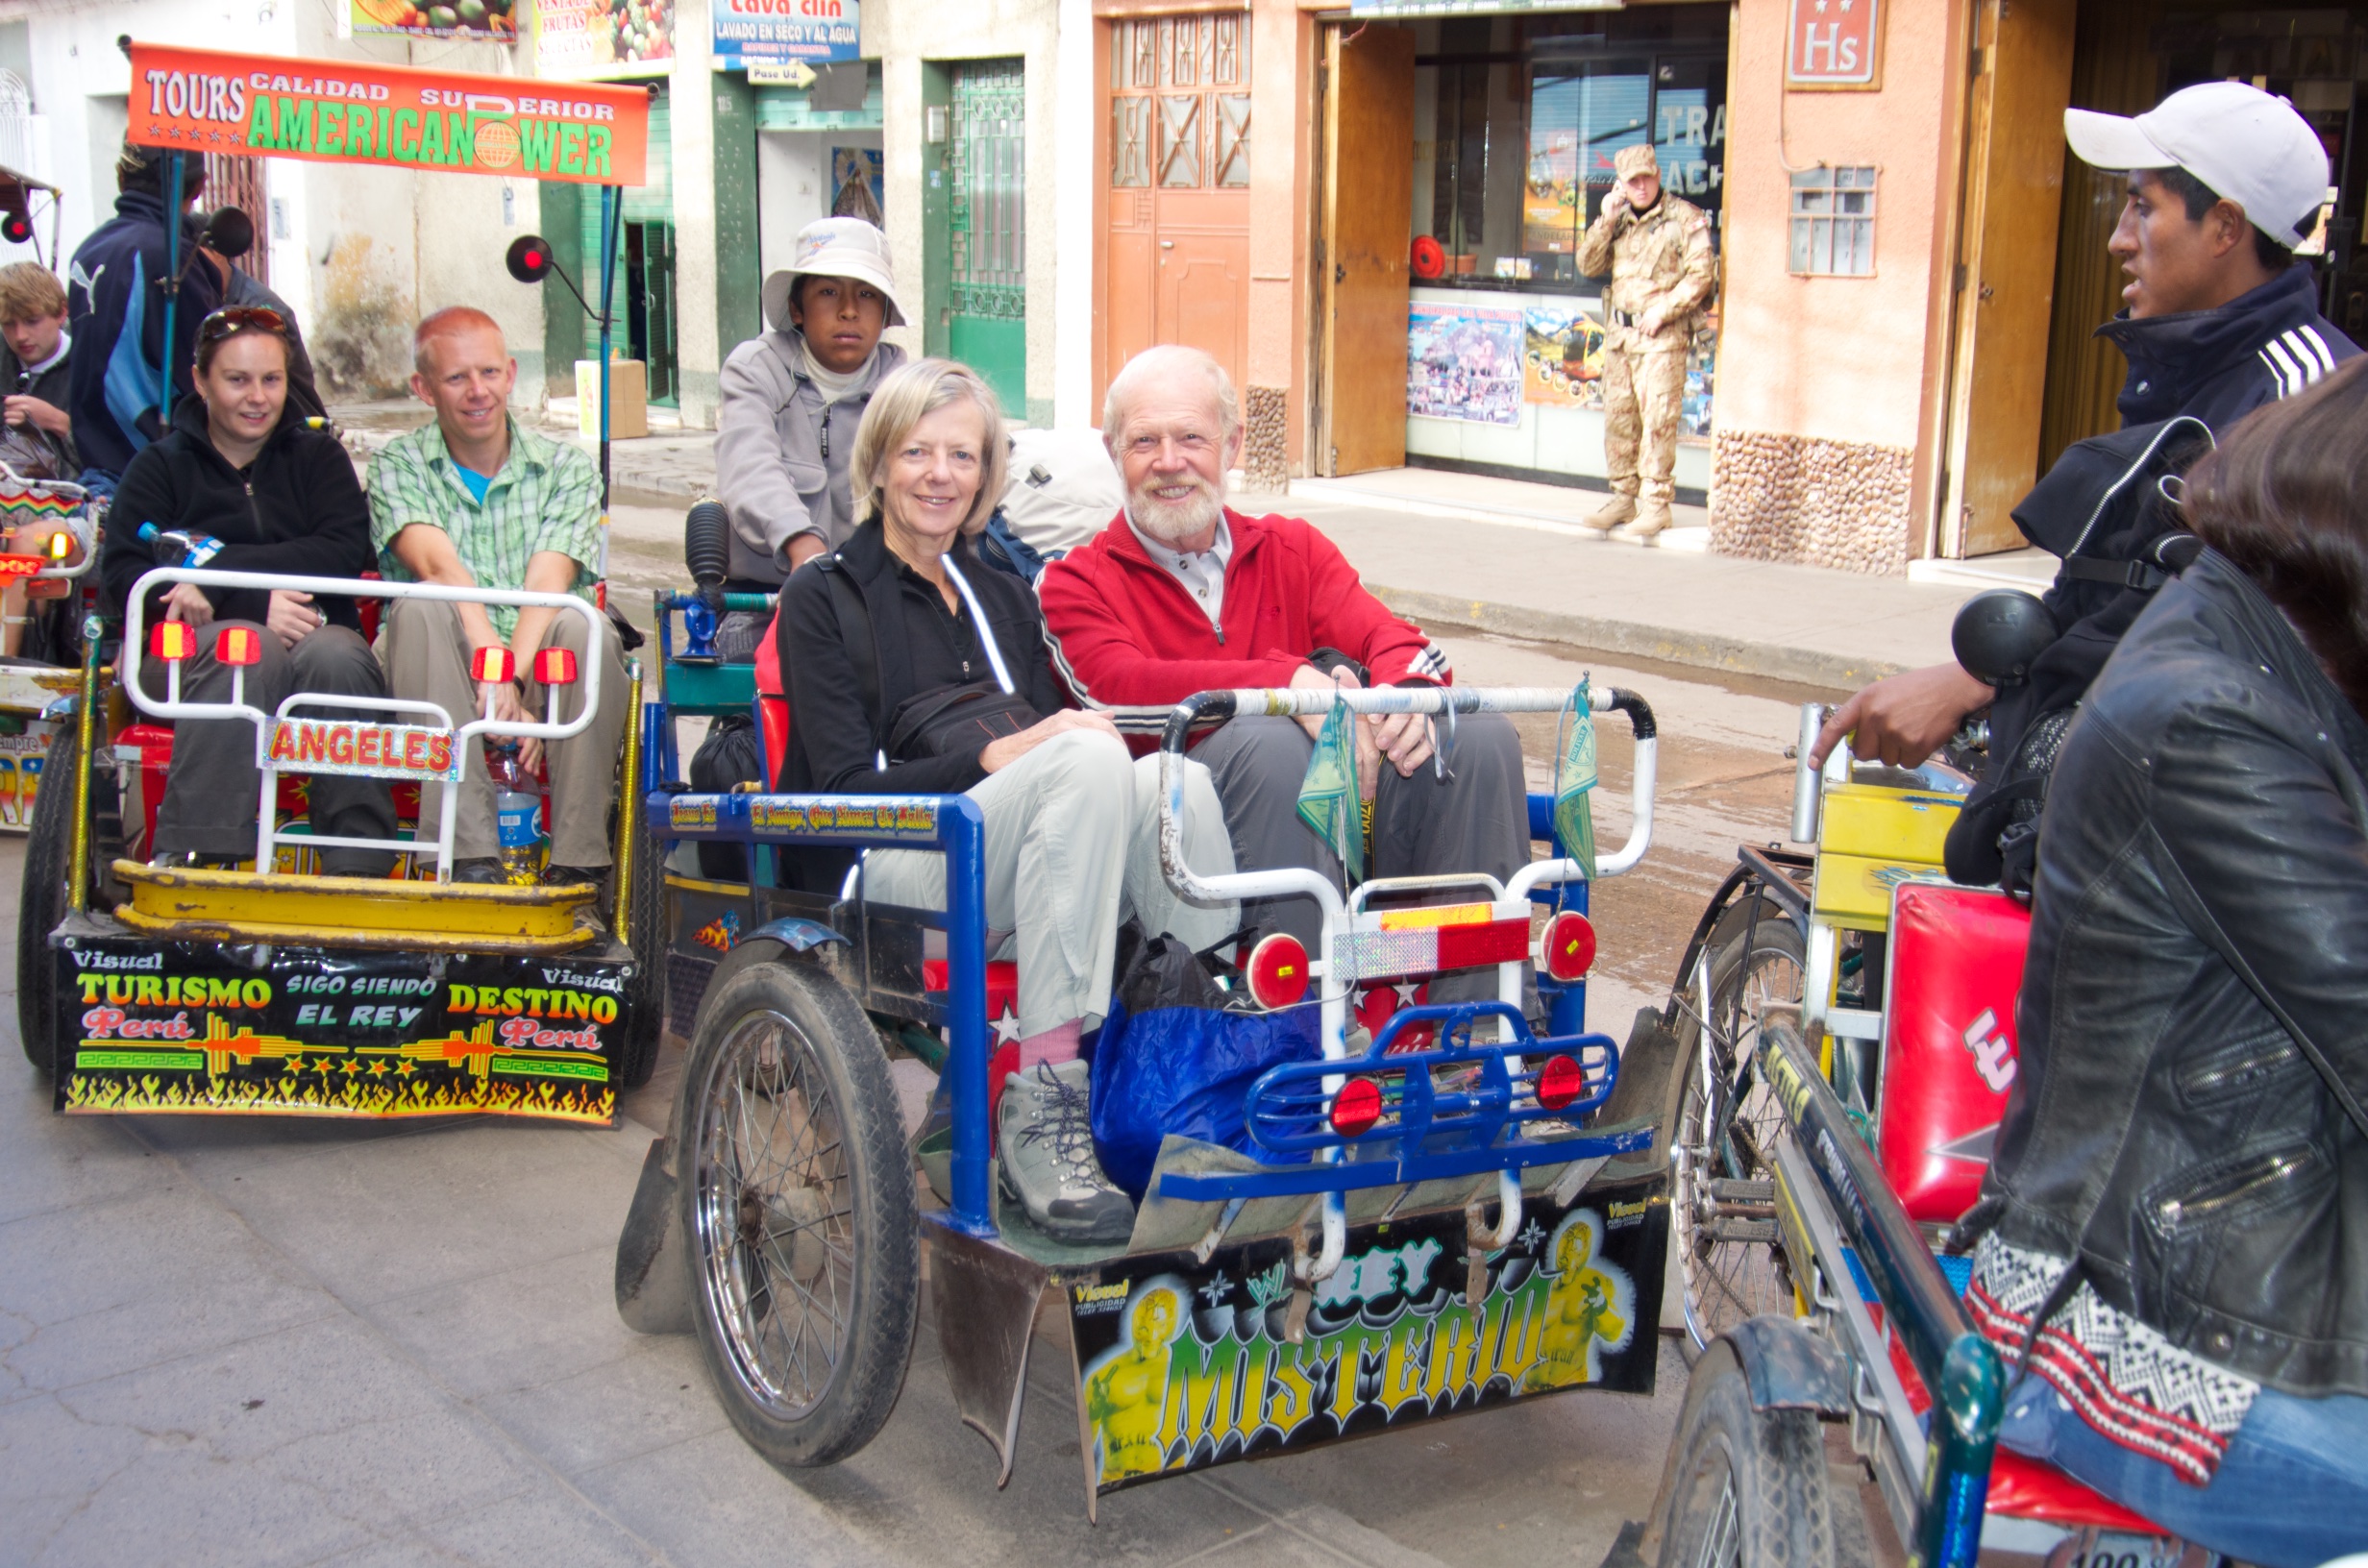  Corinne &amp; Tony, Marcus &amp; Deb in tricycle taxis Puno, Lake Titicaca, Peru 